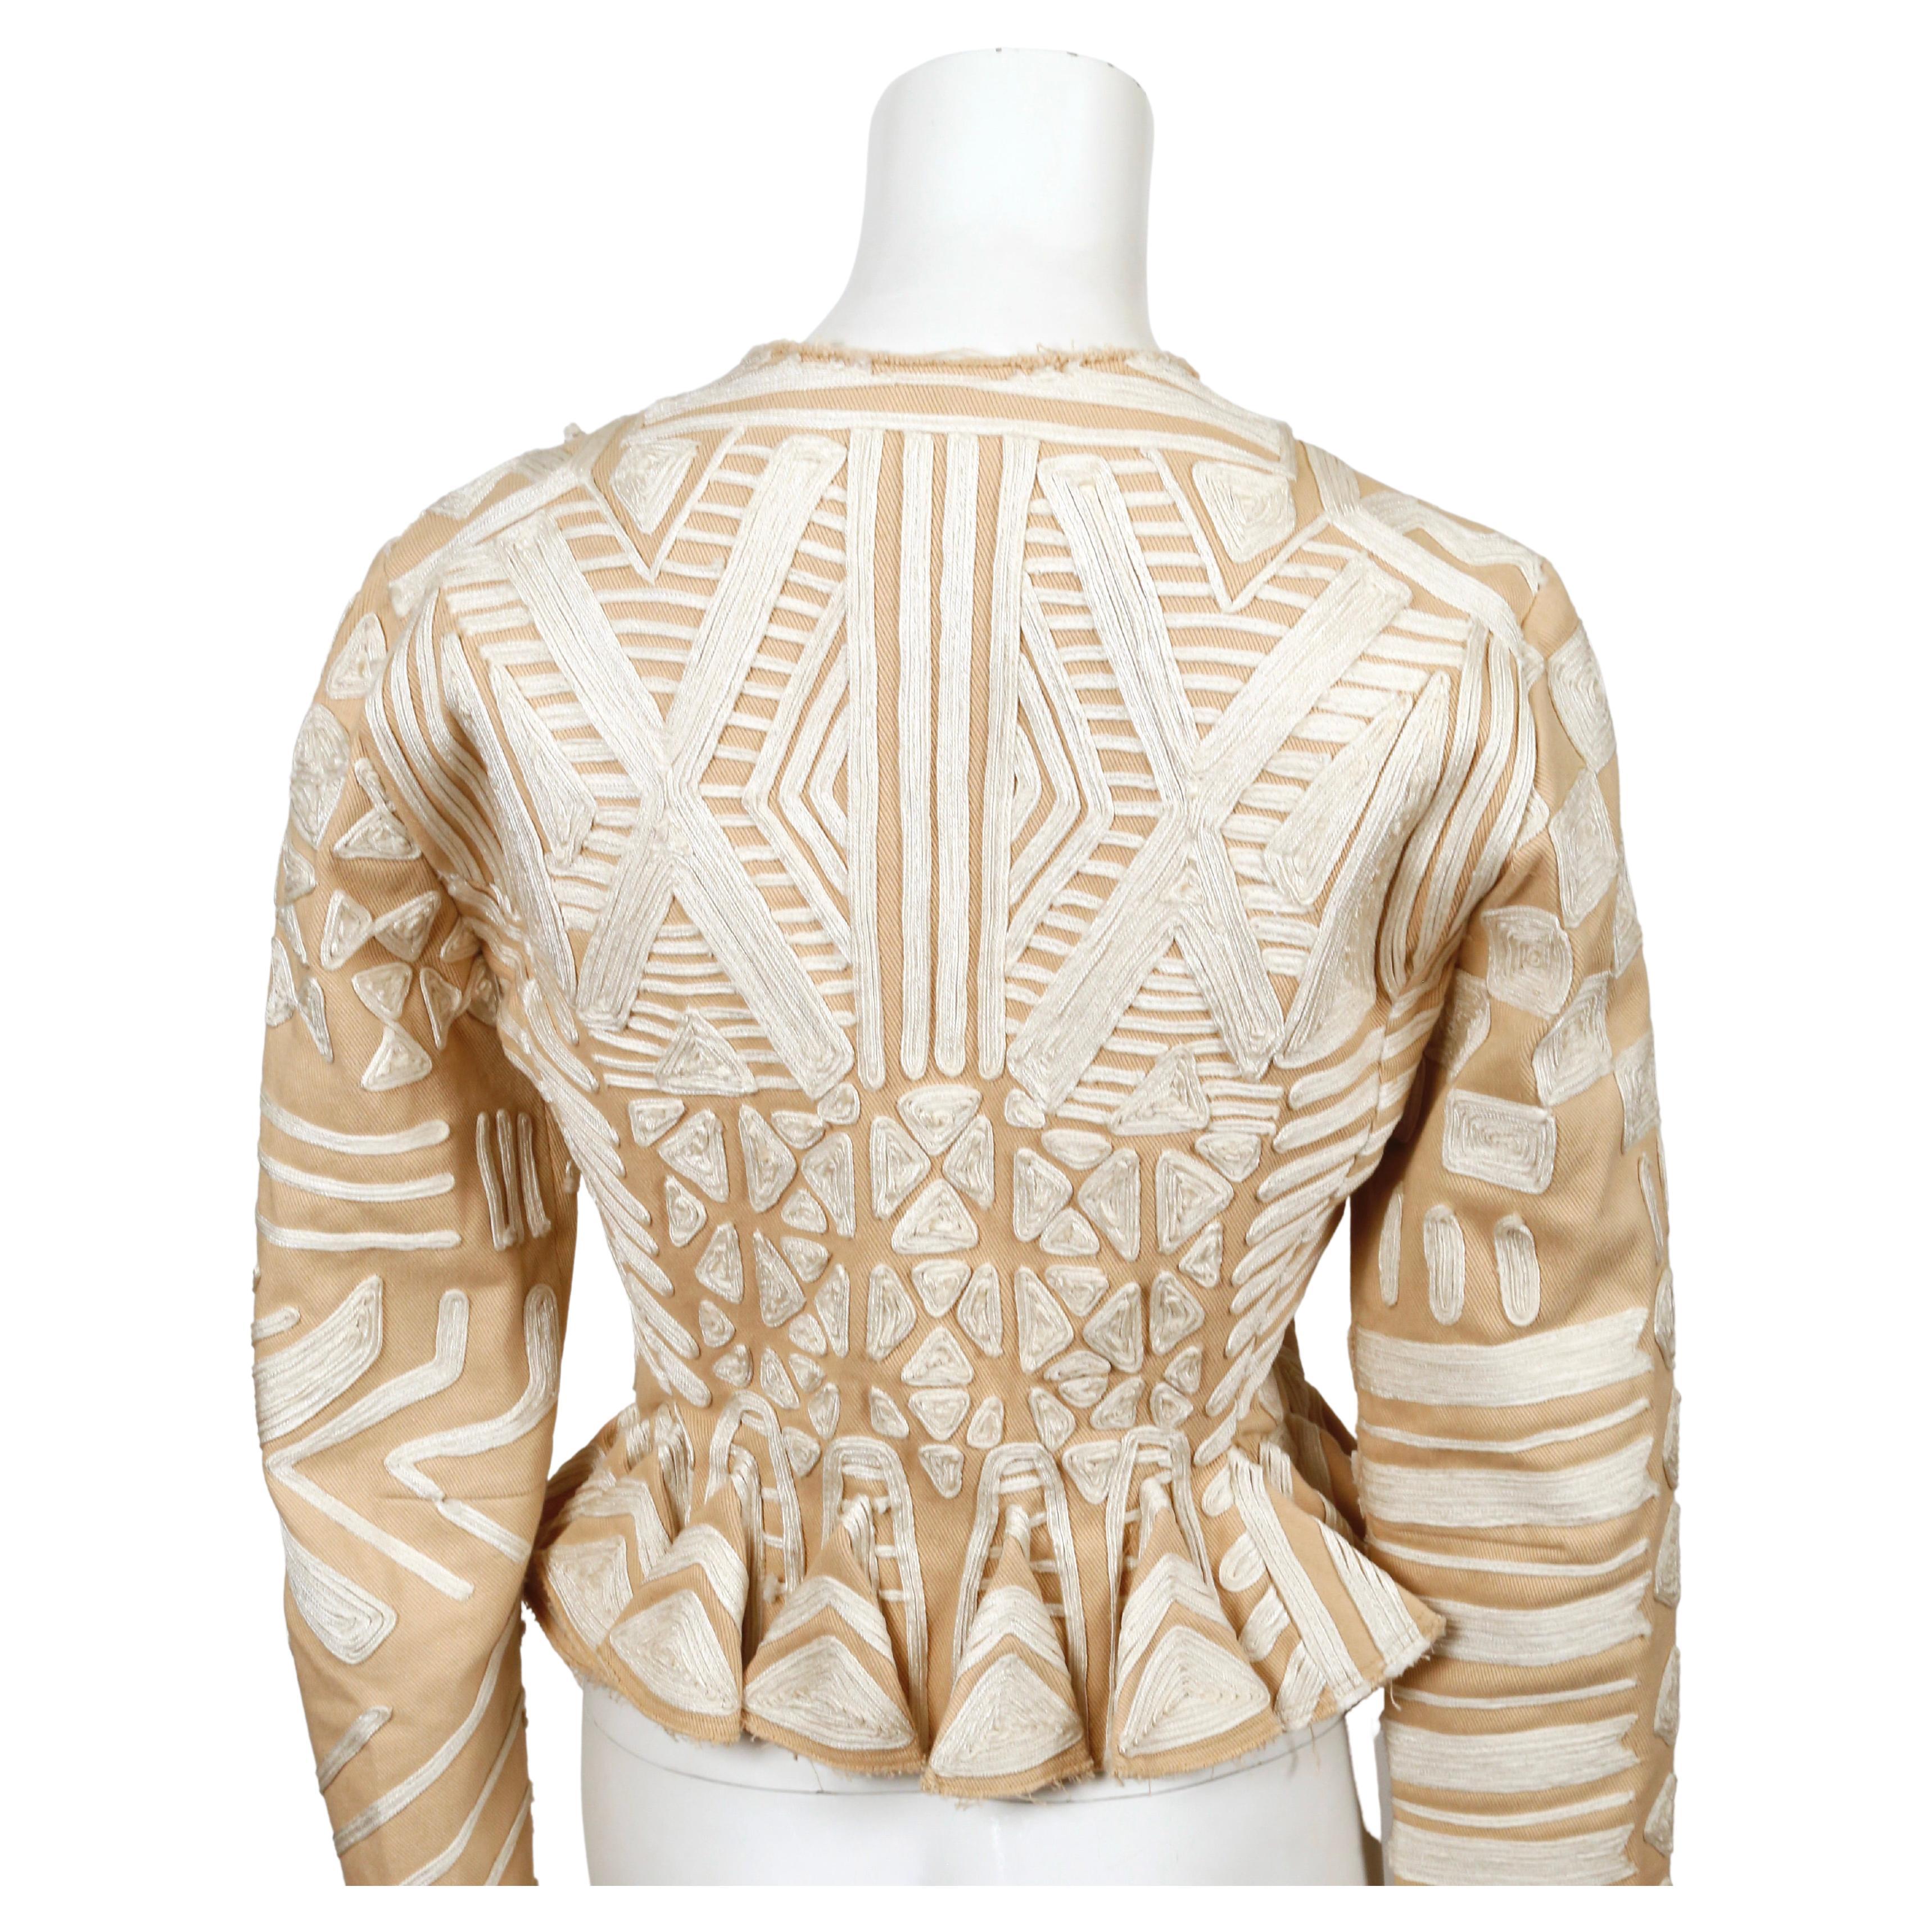 Women's or Men's 2002 TOM FORD For YVES SAINT LAURENT tan embroidered runway jacket For Sale